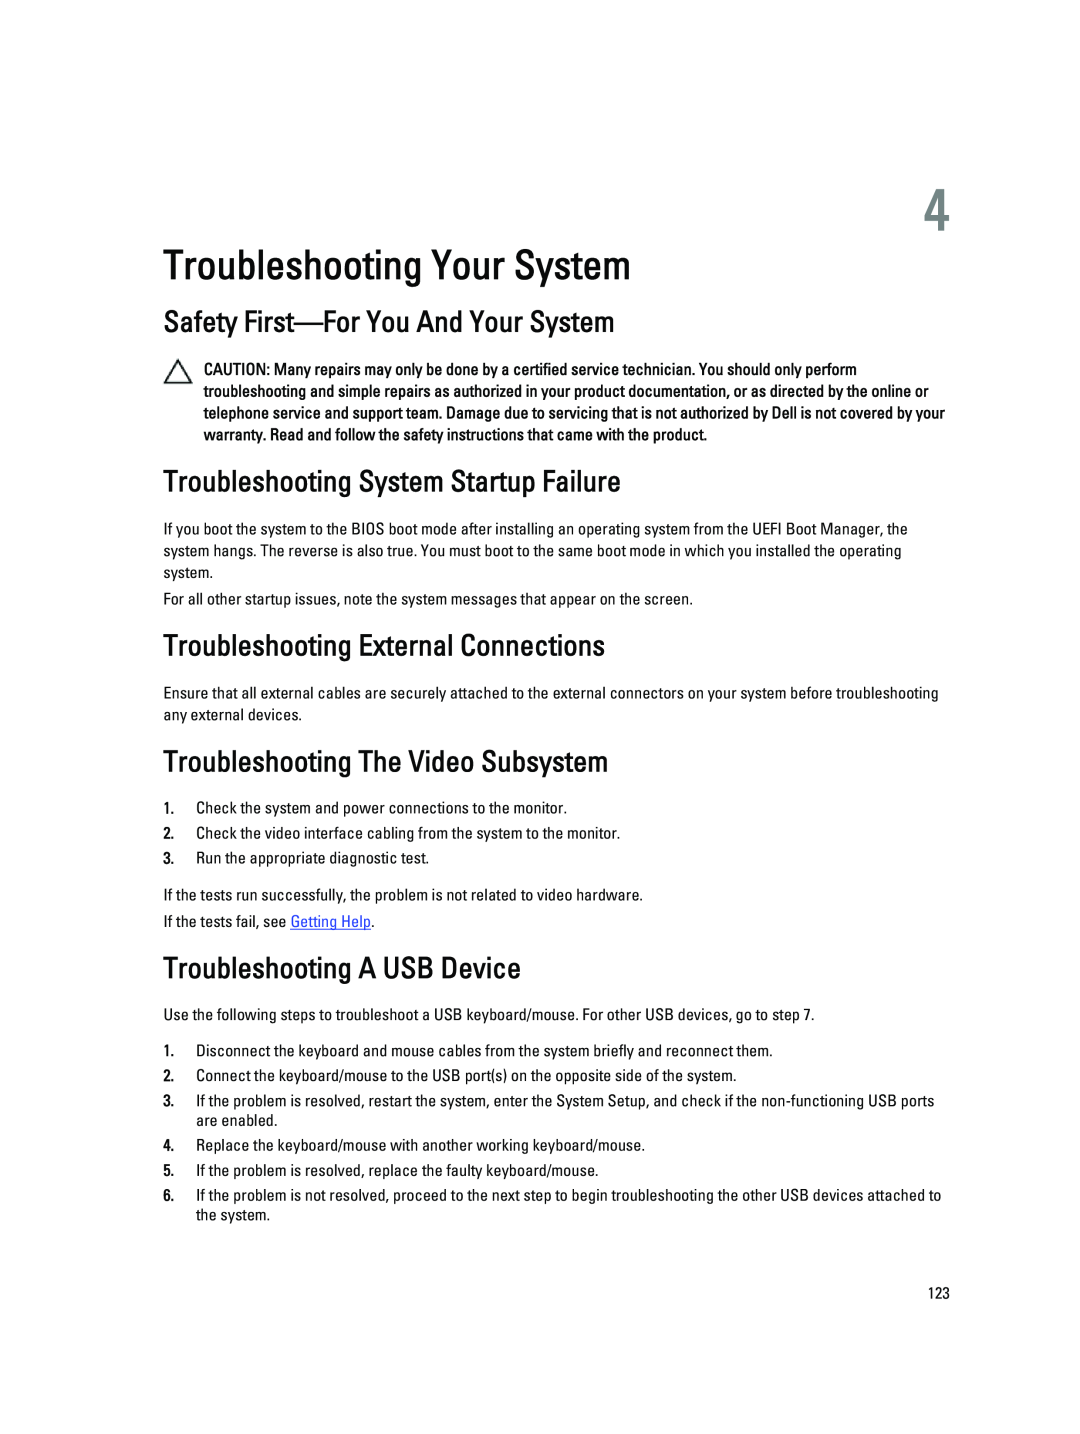 Dell R720XD Troubleshooting Your System, Safety First-ForYou And Your System, Troubleshooting System Startup Failure 